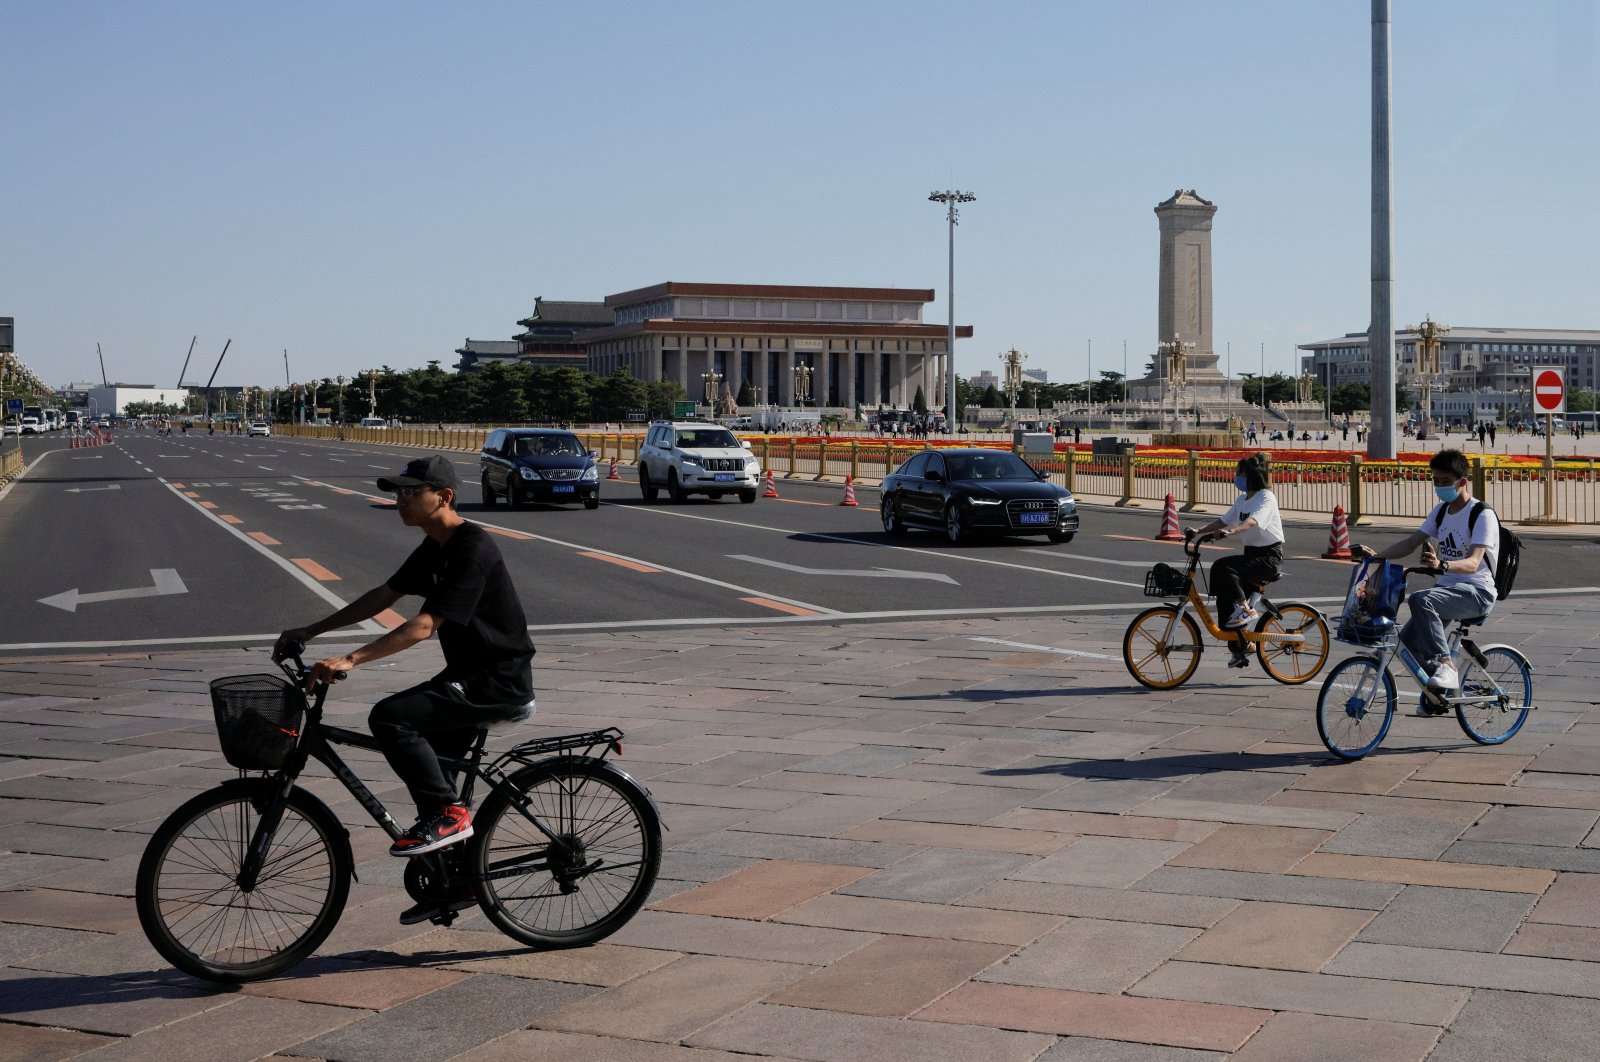 Cyclists cross Tiananmen Square in Beijing, China, June 3, 2021. (Reuters Photo)